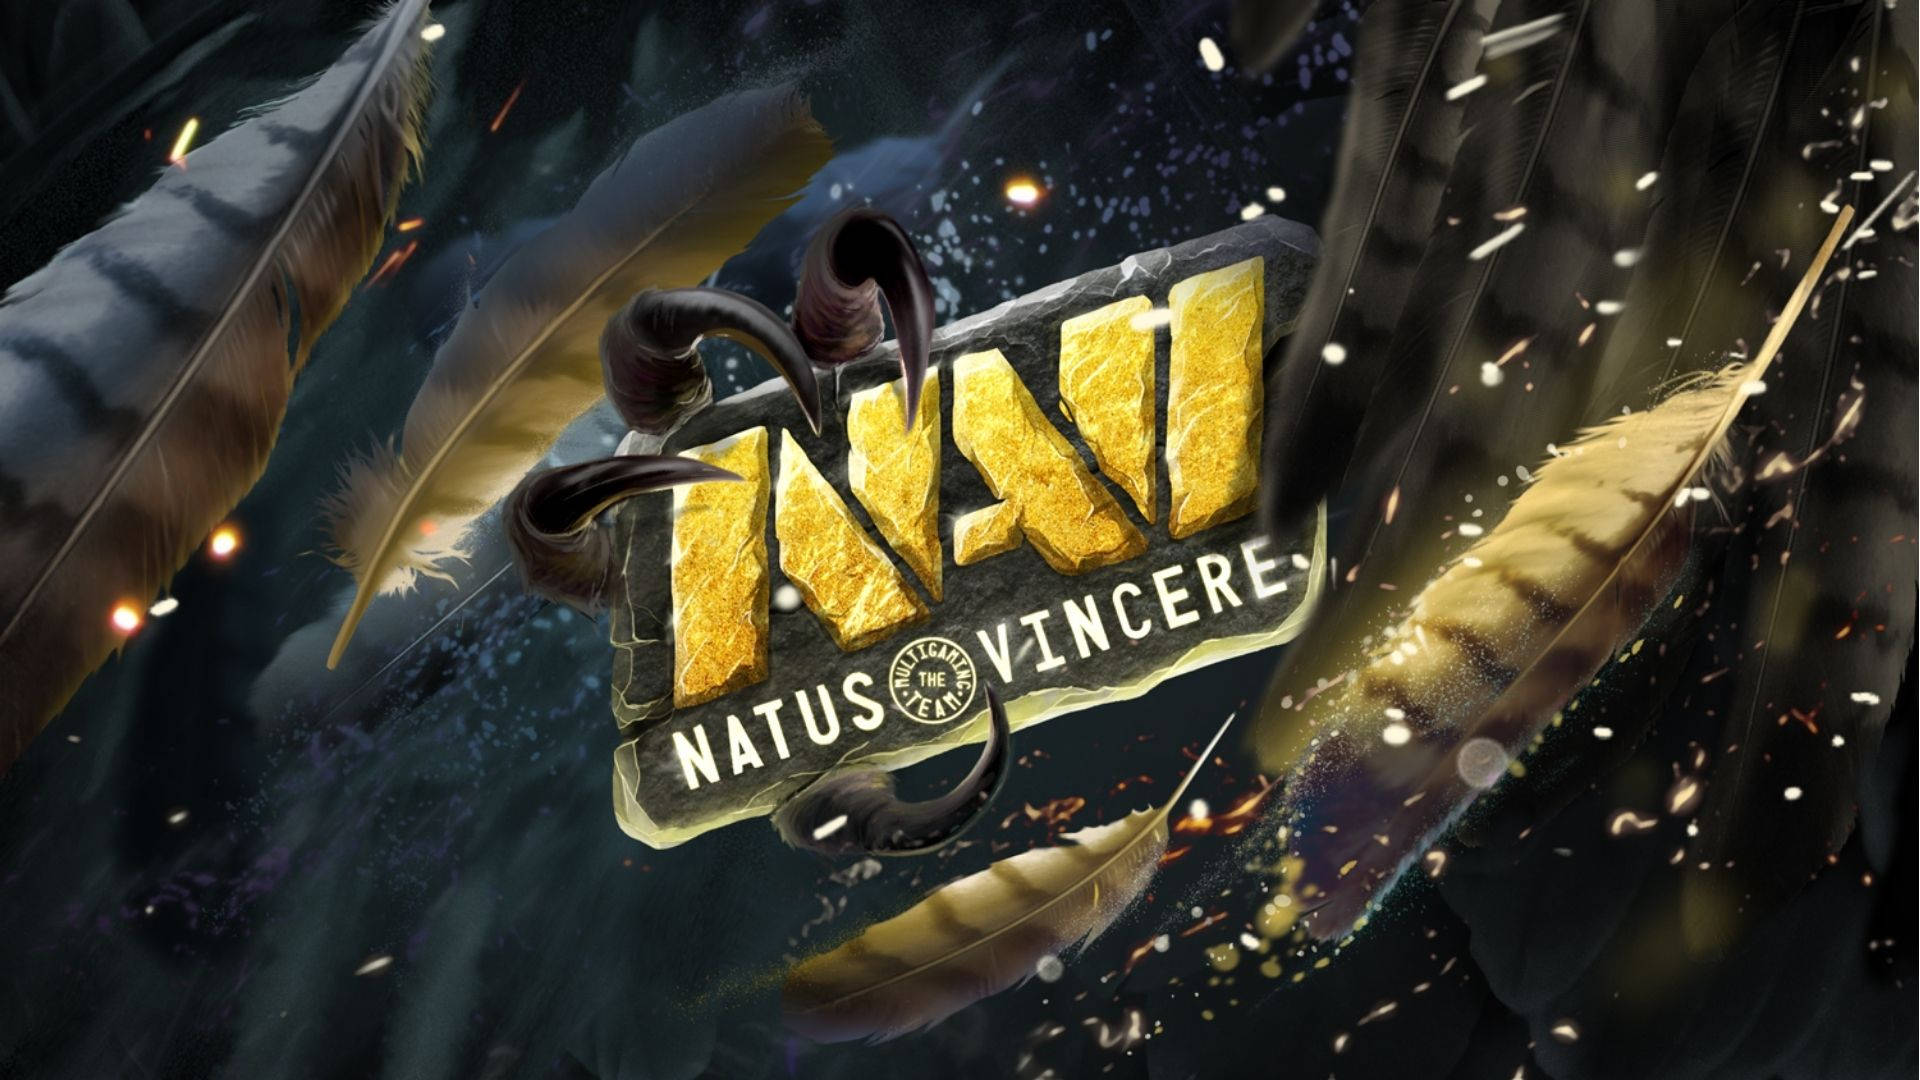 Claw Holding Natus Vincere Background